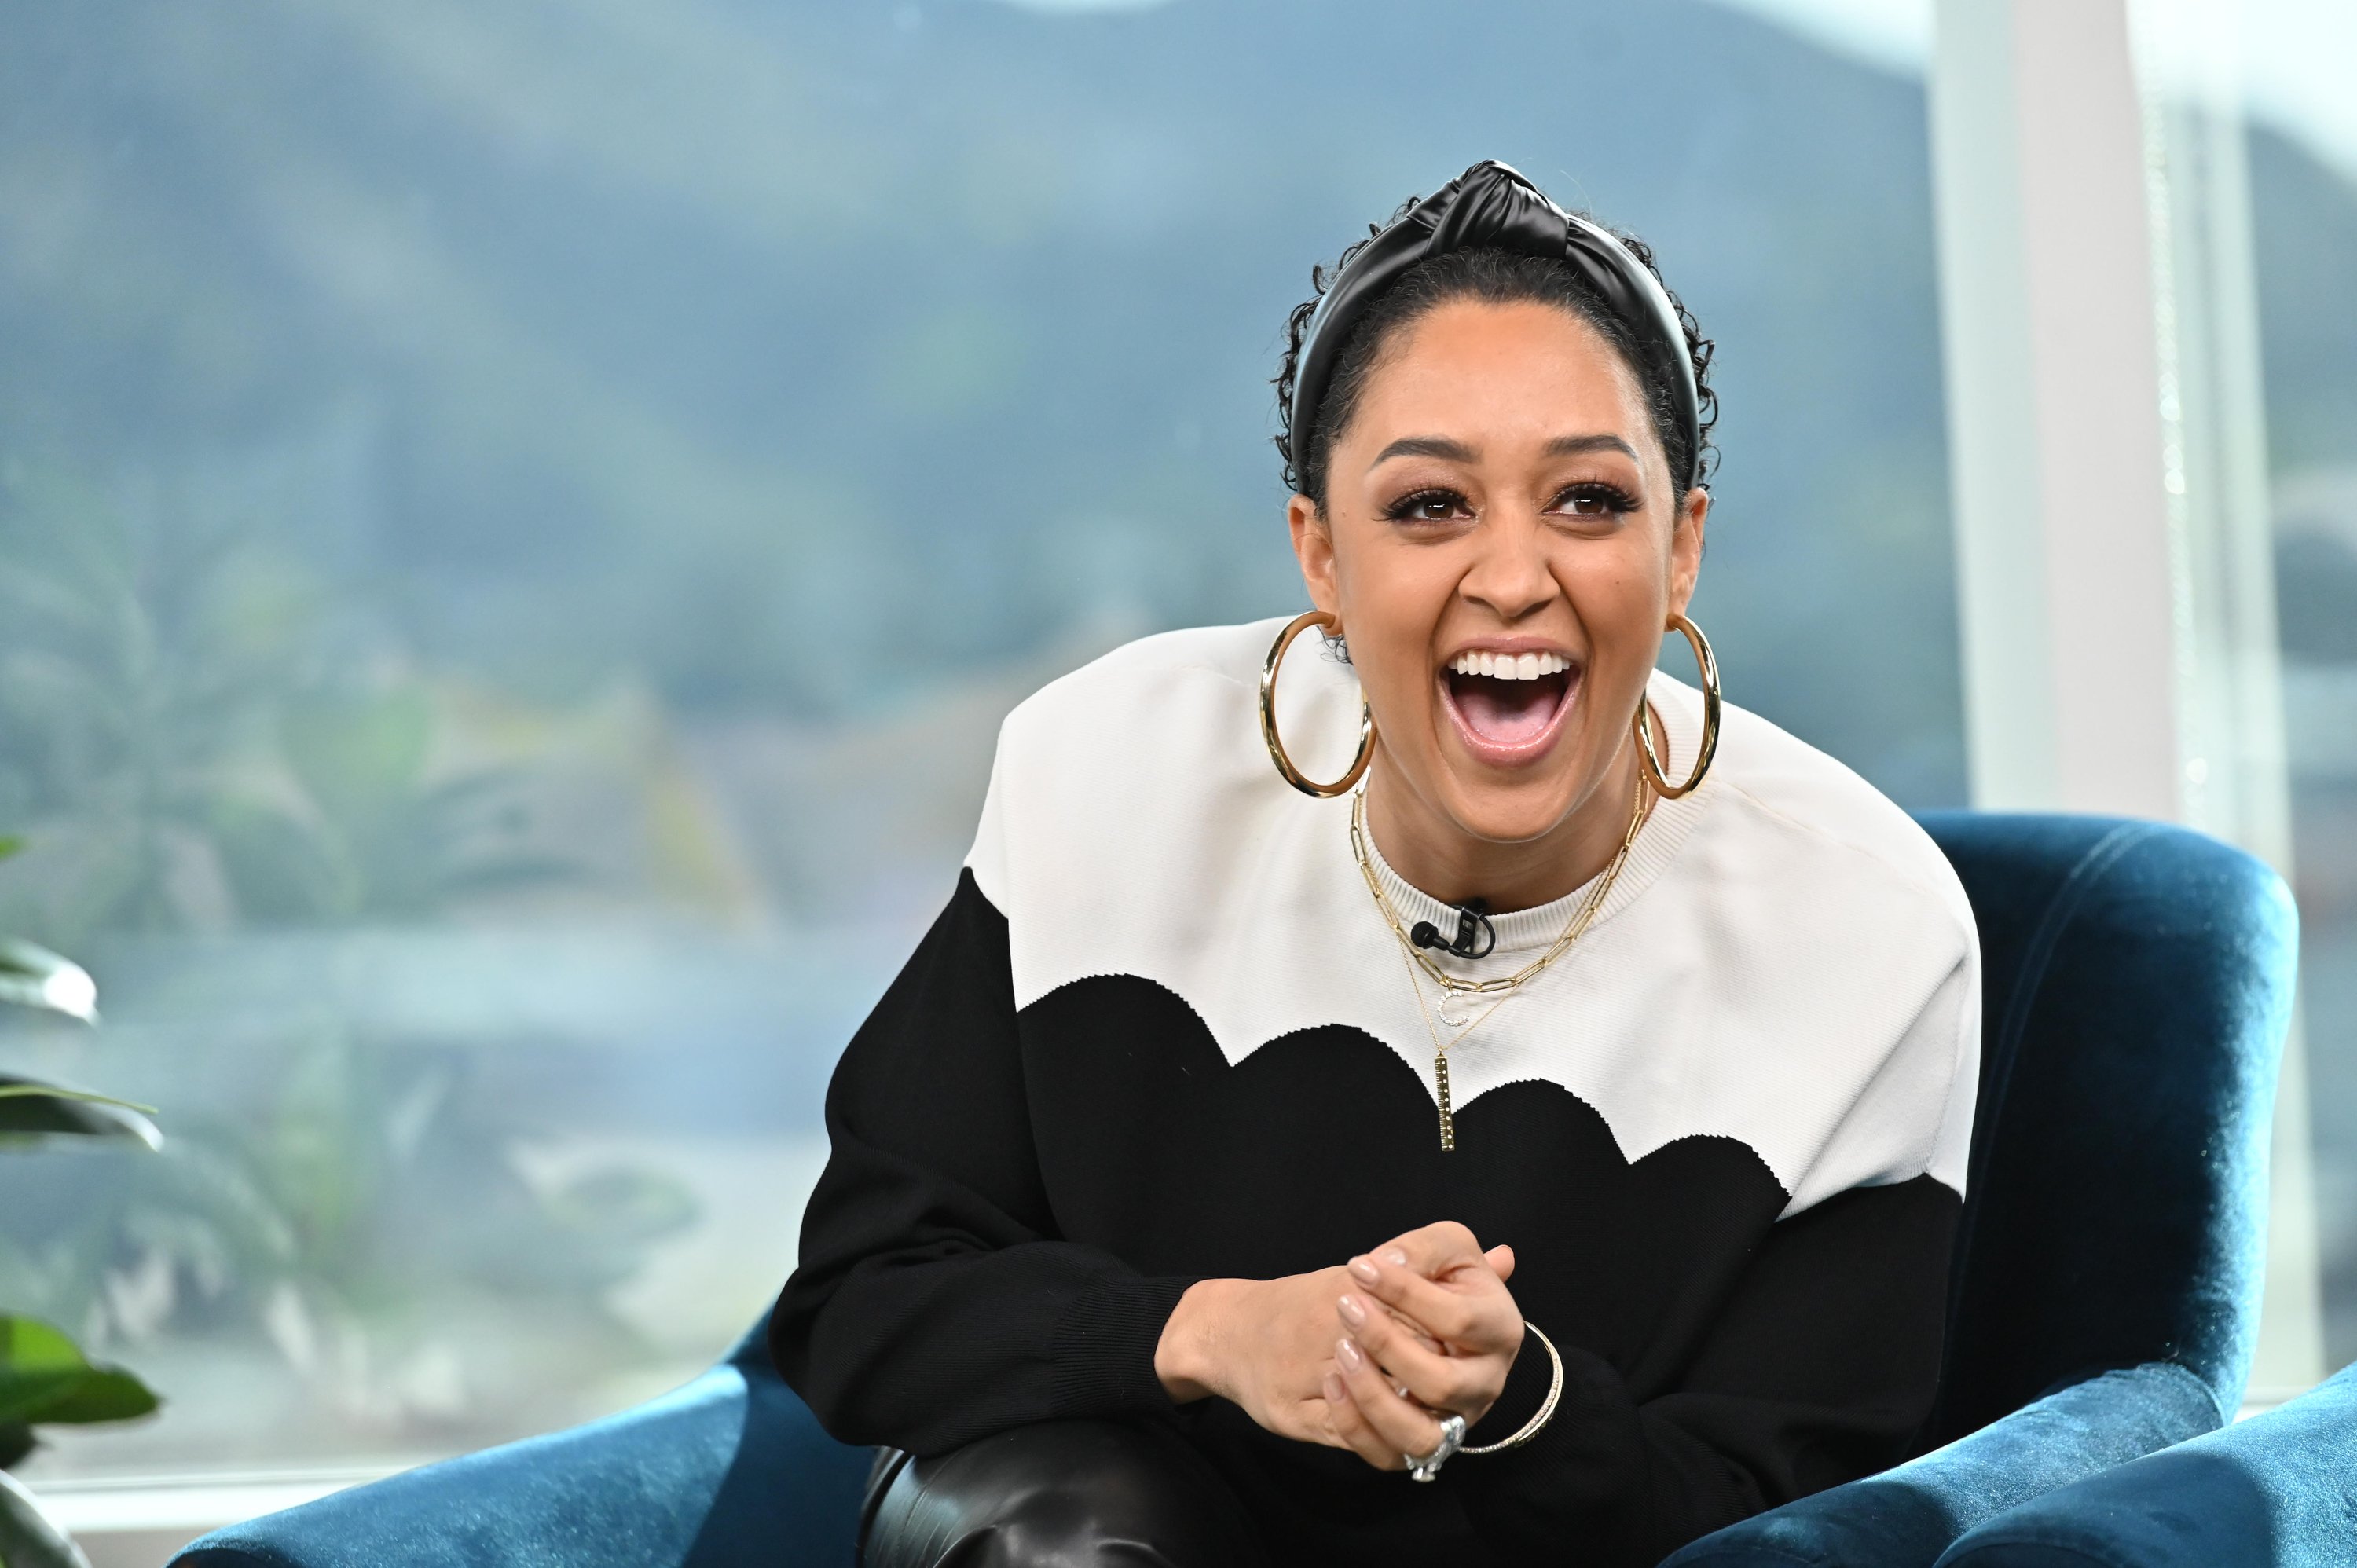 Tia Mowry-Hardrict on the set of E!’s “Daily Pop” on February 27, 2020. | Source: Getty Images